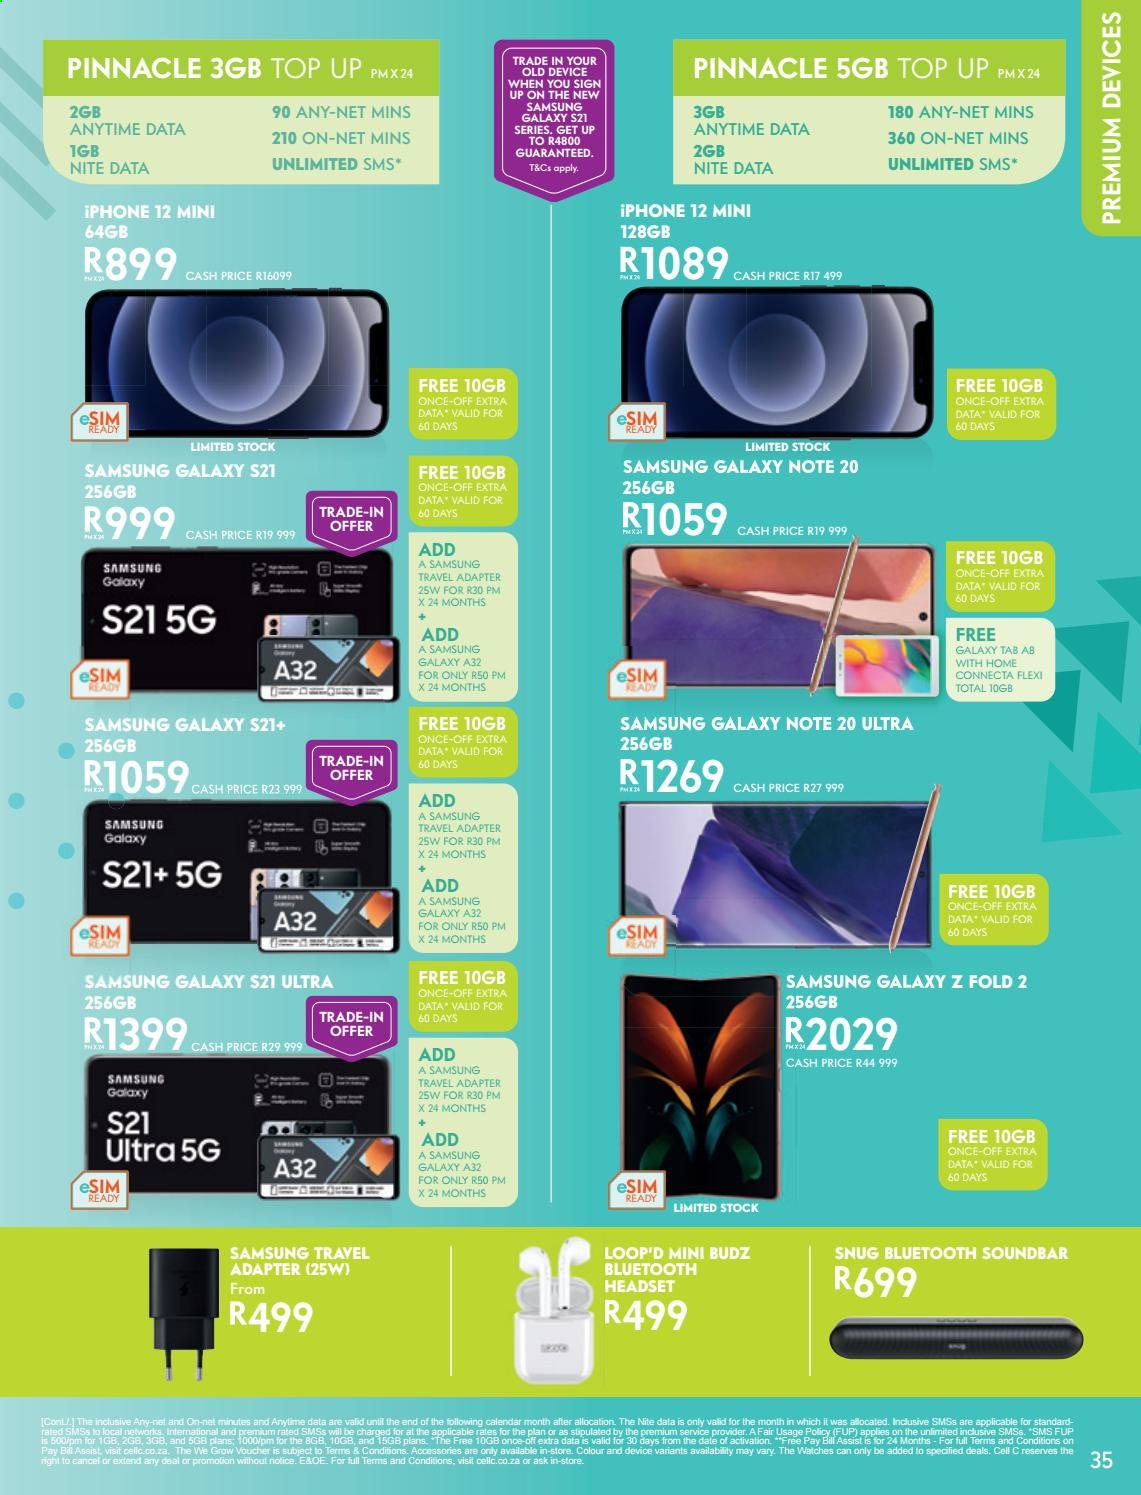 Cell C specials - 06.01.2021 - 07.12.2021. 